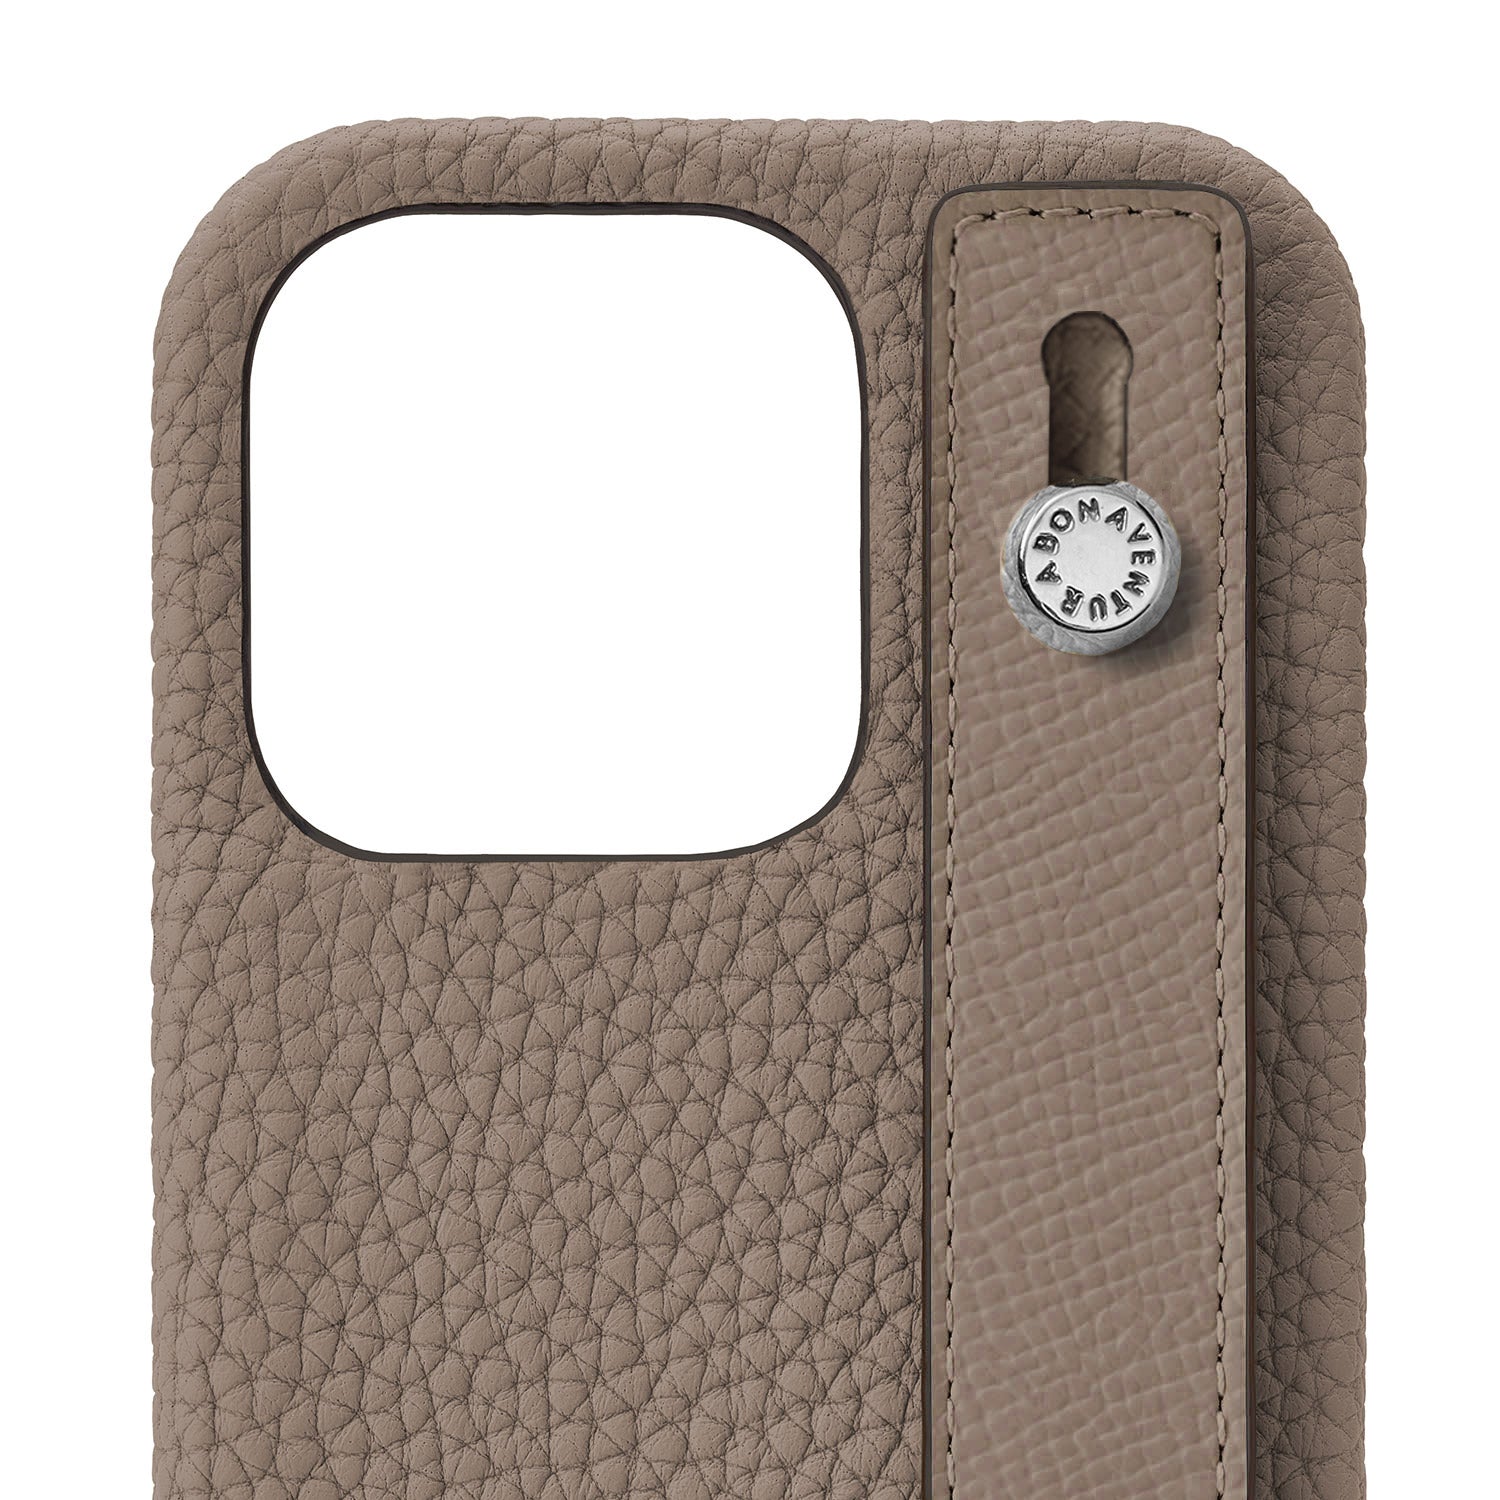 (iPhone 14 Pro) Back cover case with handle, shrink leather